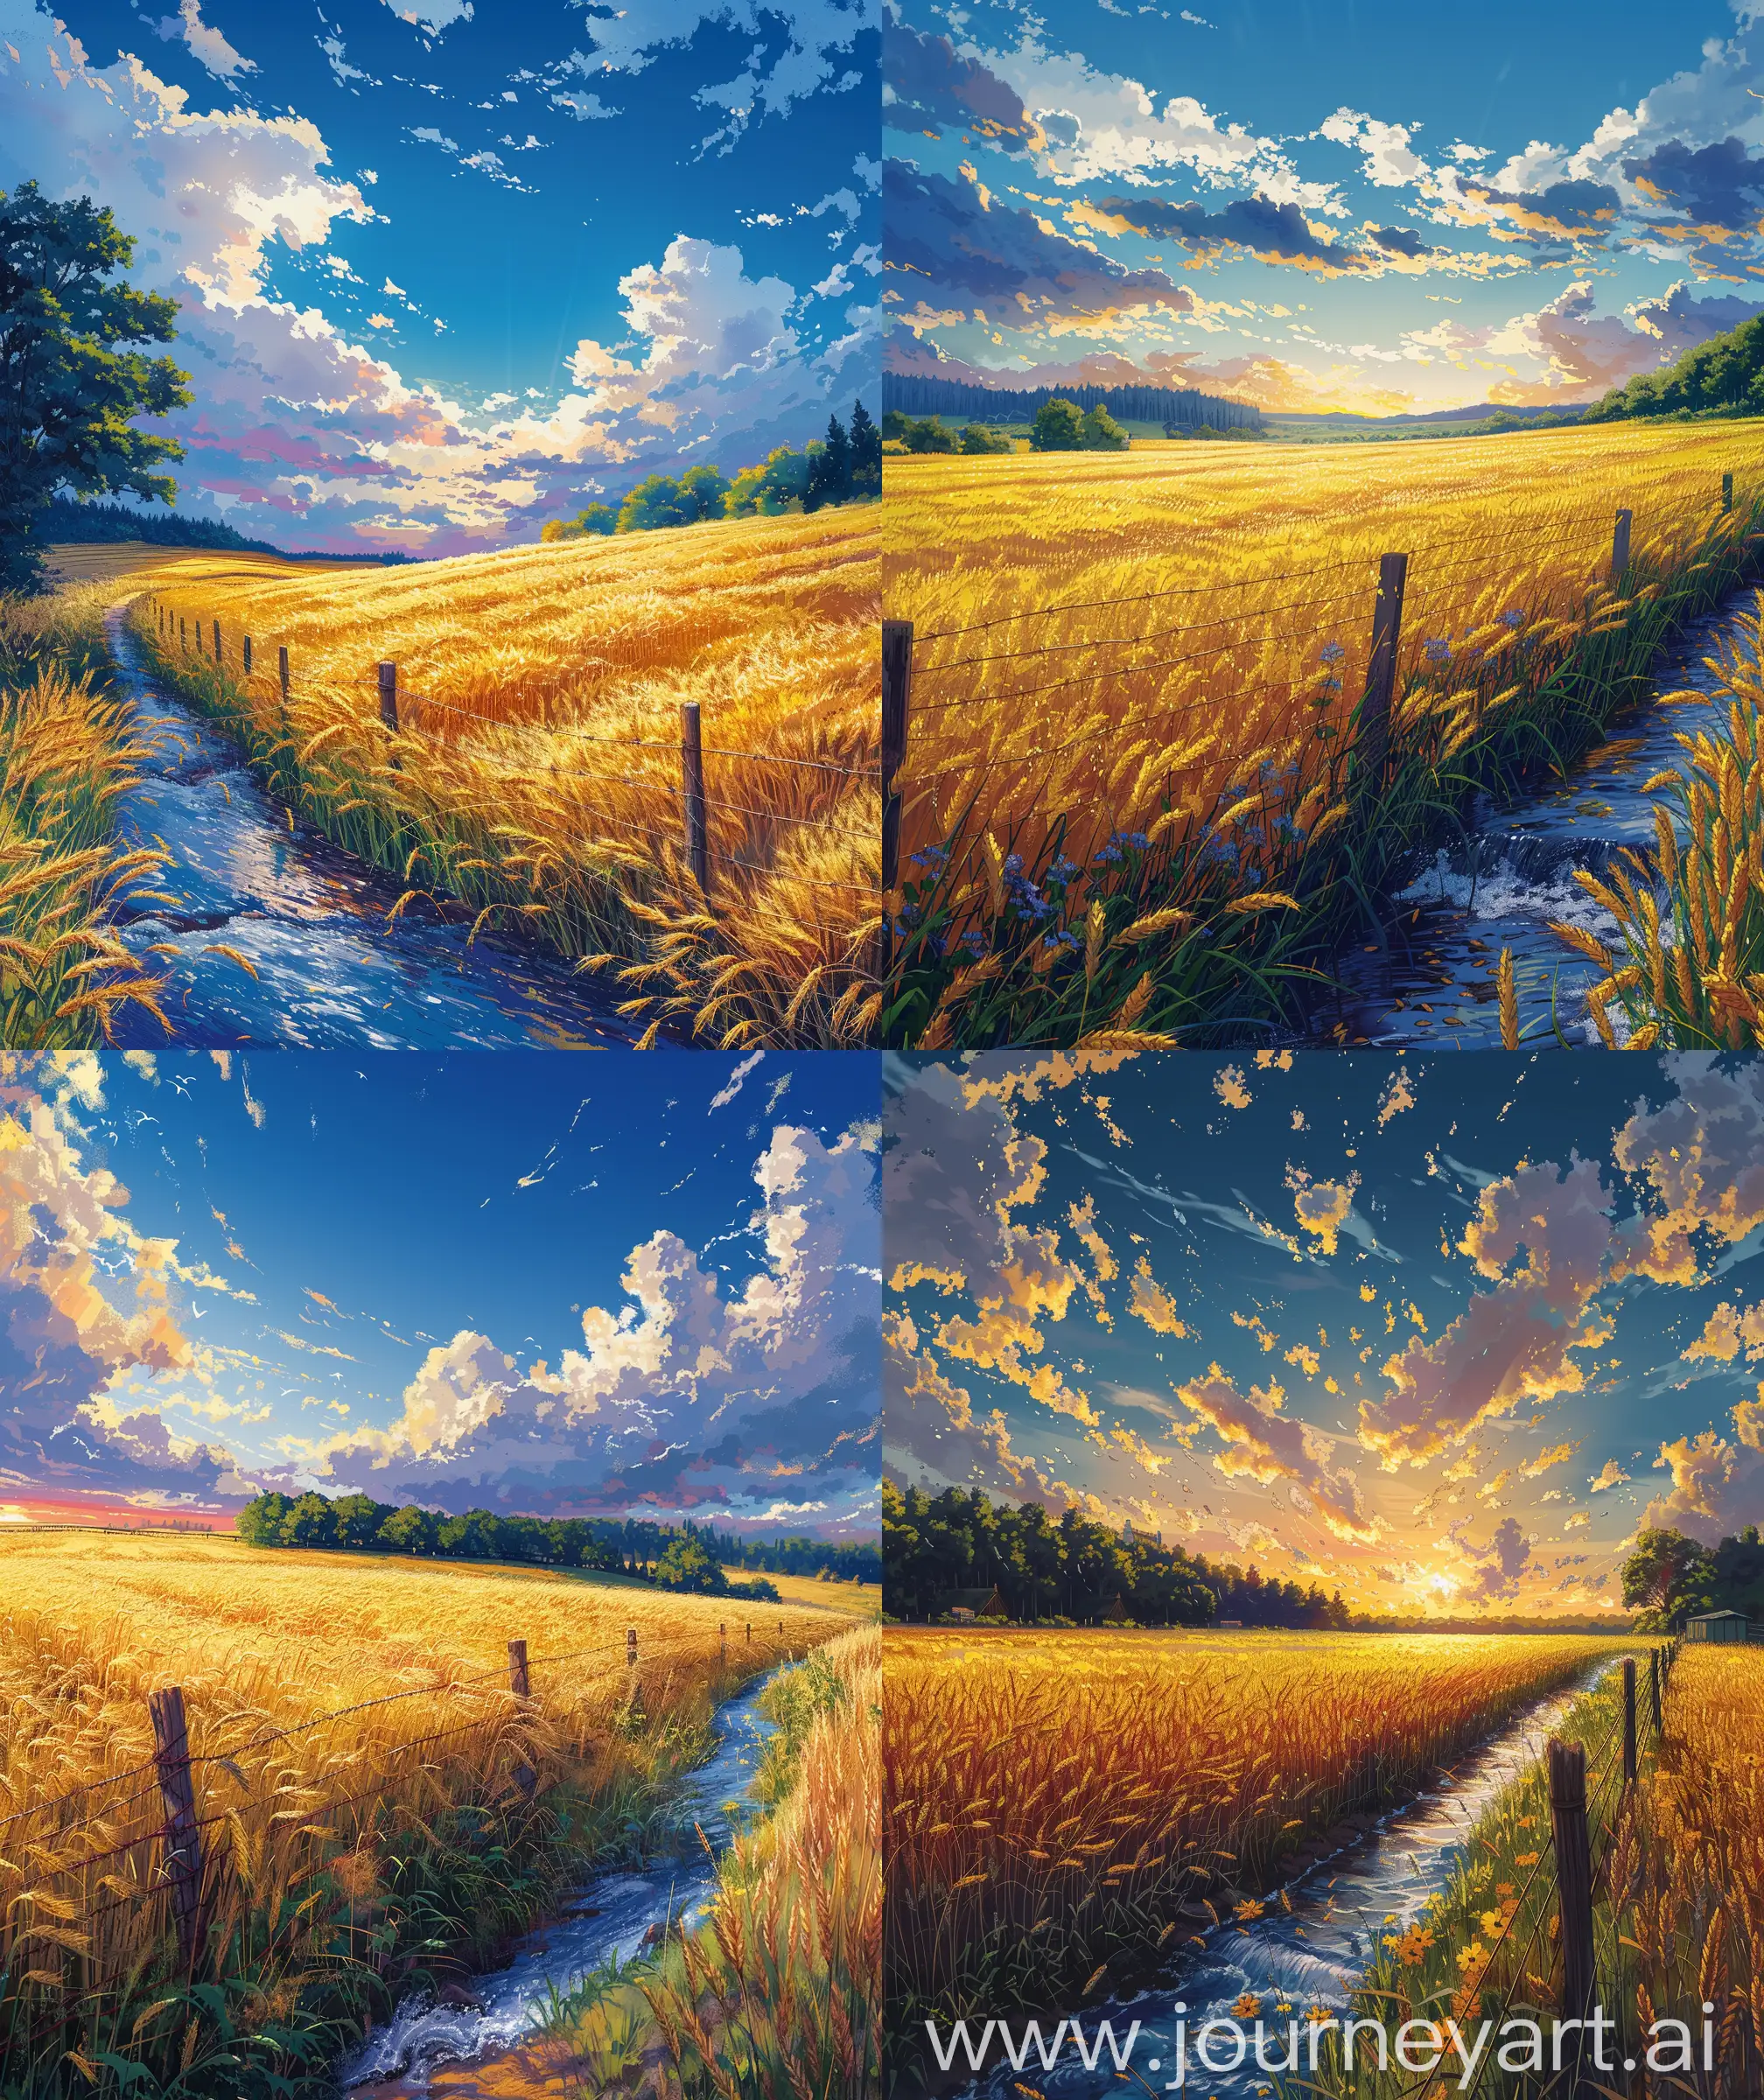 Anime-Style-Morning-Scenery-Golden-Wheat-Fields-and-Flowing-Stream